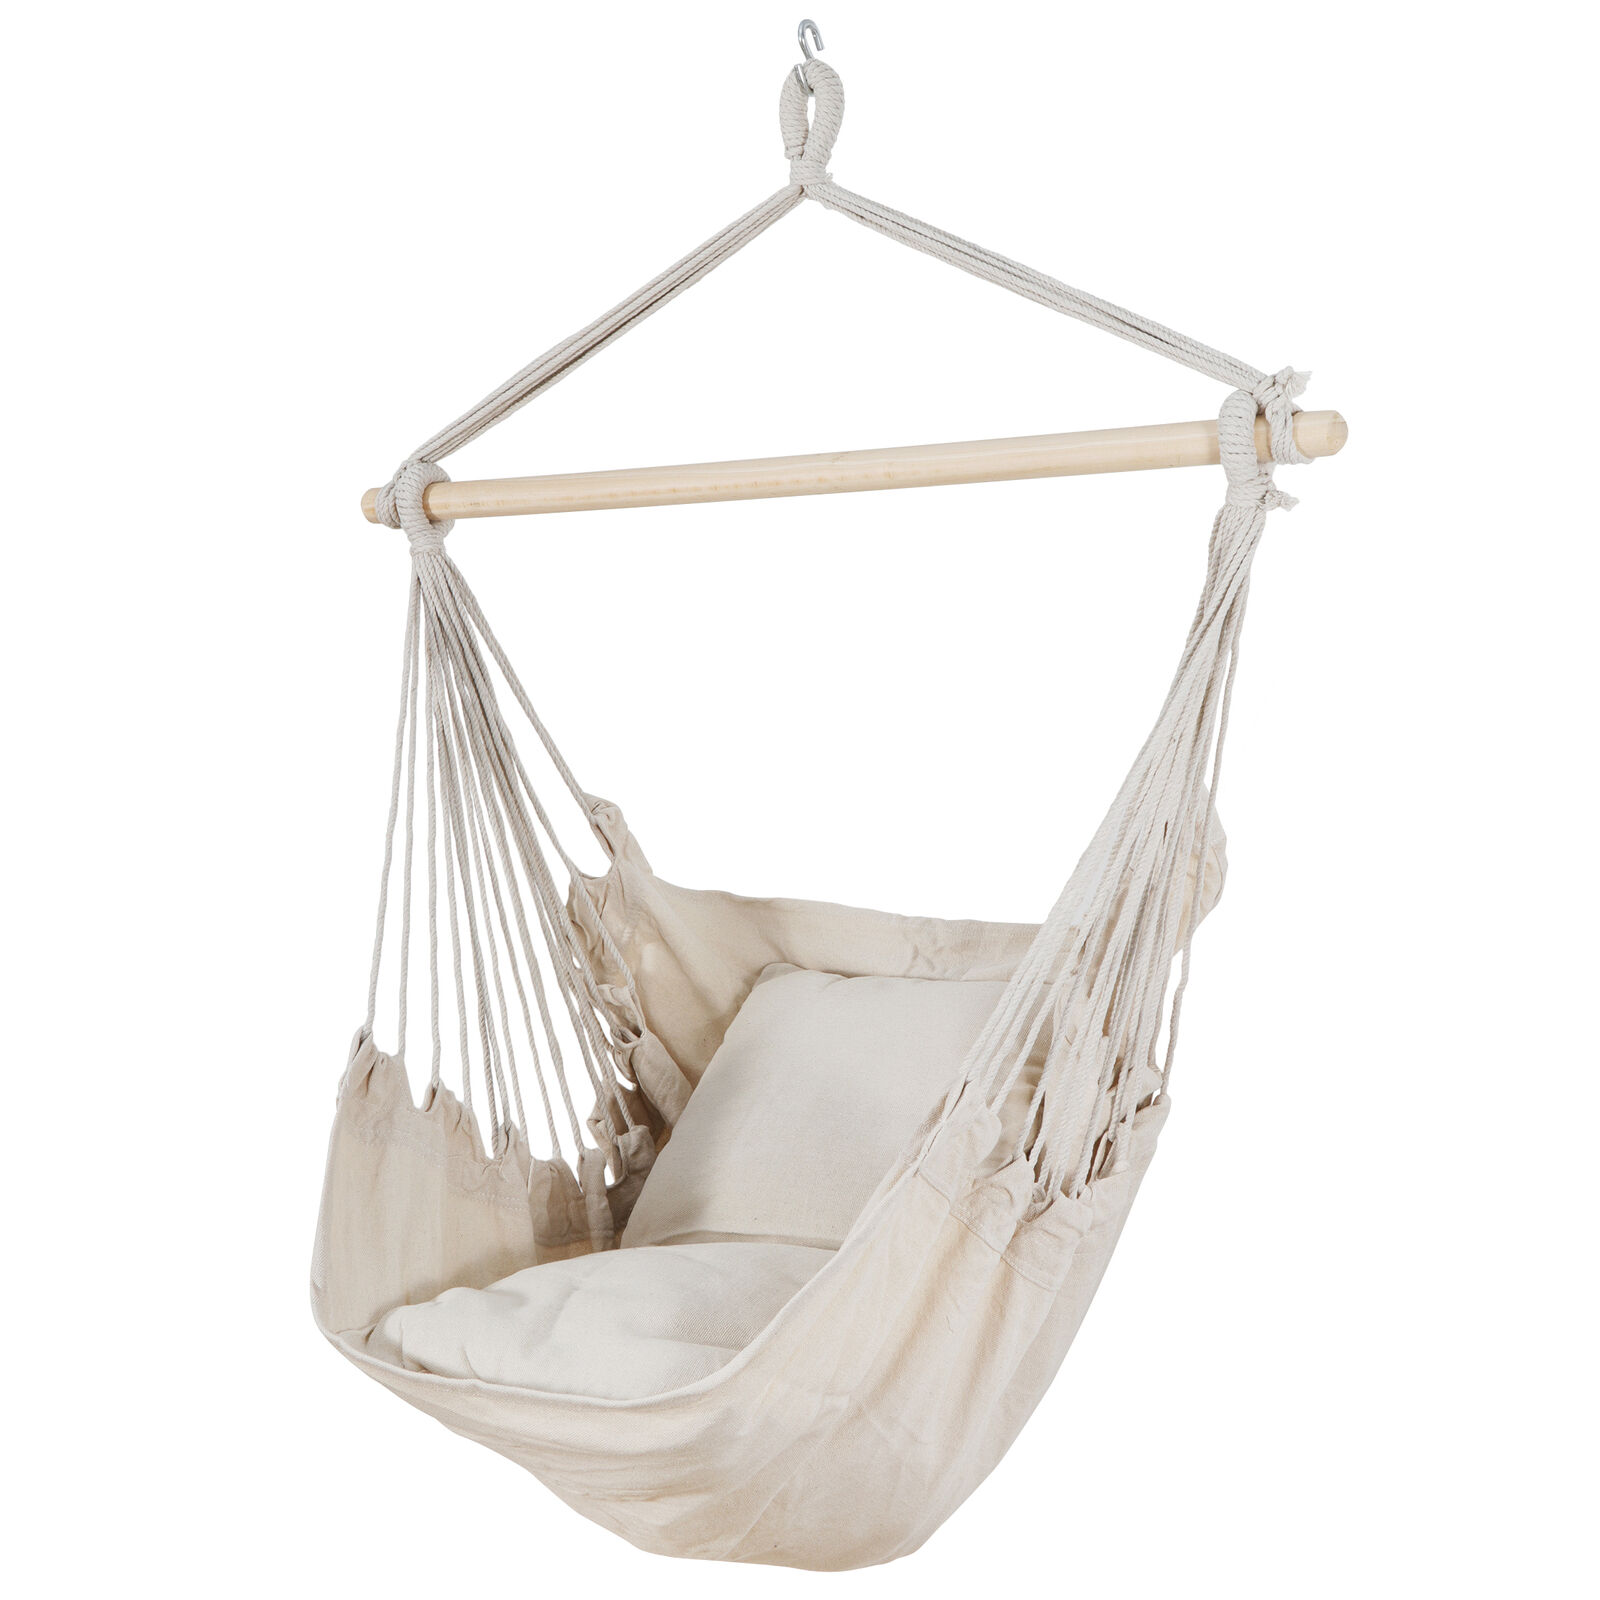 Beige Hammock Chair Swing Hanging Rope Net Chair Porch Patio with 2 Cushions